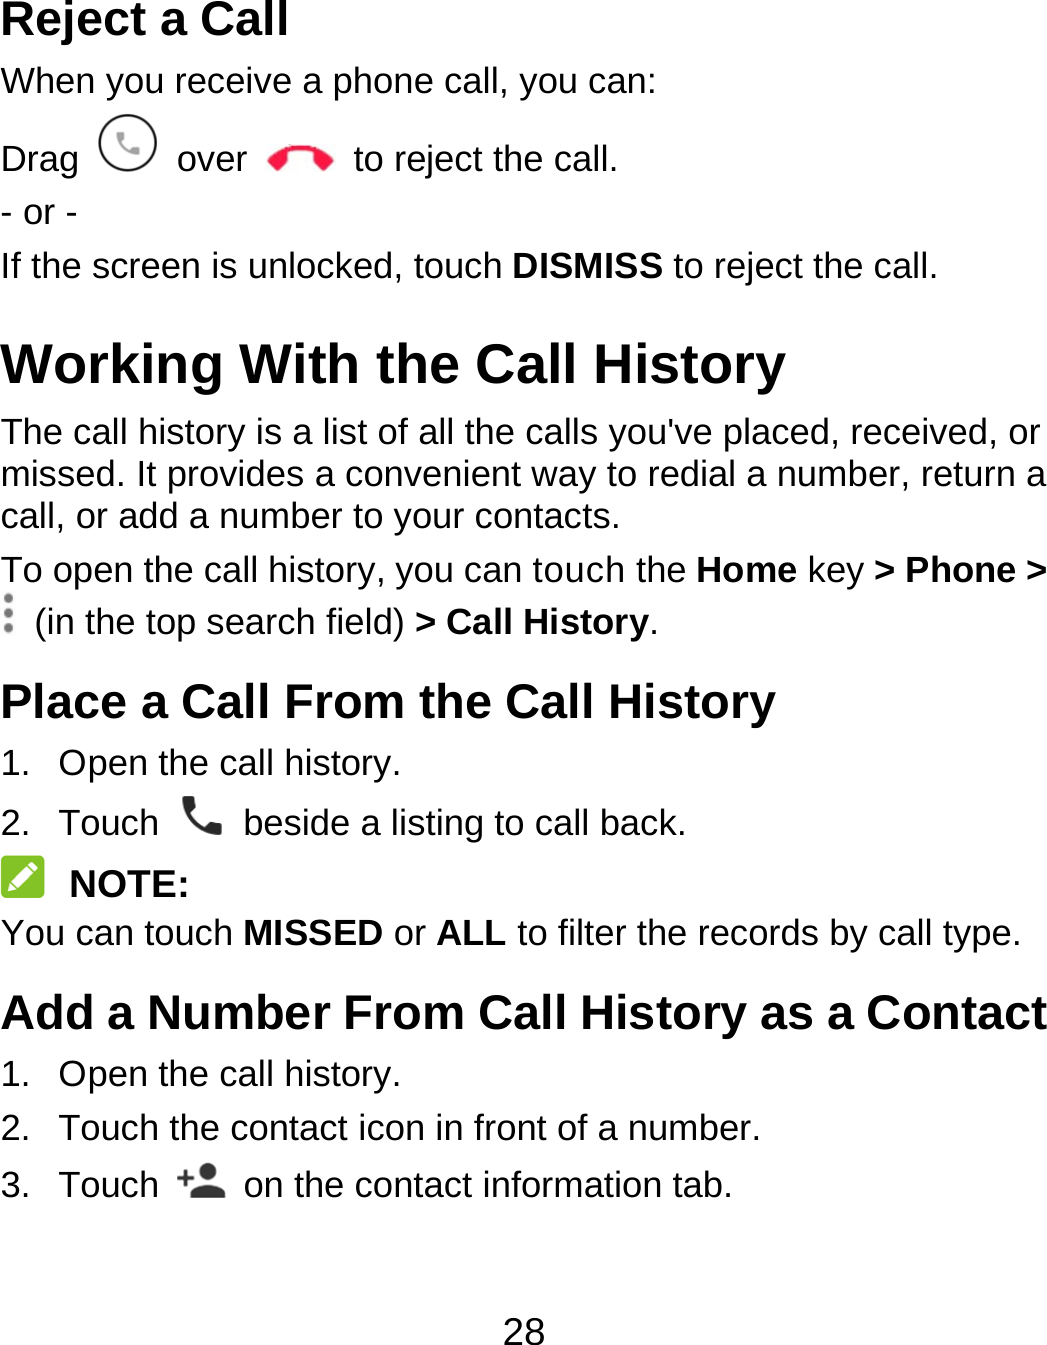 28 Reject a Call When you receive a phone call, you can: Drag   over    to reject the call. - or - If the screen is unlocked, touch DISMISS to reject the call. Working With the Call History The call history is a list of all the calls you&apos;ve placed, received, or missed. It provides a convenient way to redial a number, return a call, or add a number to your contacts. To open the call history, you can touch the Home key &gt; Phone &gt;   (in the top search field) &gt; Call History. Place a Call From the Call History 1.  Open the call history. 2. Touch    beside a listing to call back.  NOTE: You can touch MISSED or ALL to filter the records by call type. Add a Number From Call History as a Contact 1.  Open the call history. 2.  Touch the contact icon in front of a number. 3. Touch    on the contact information tab.  